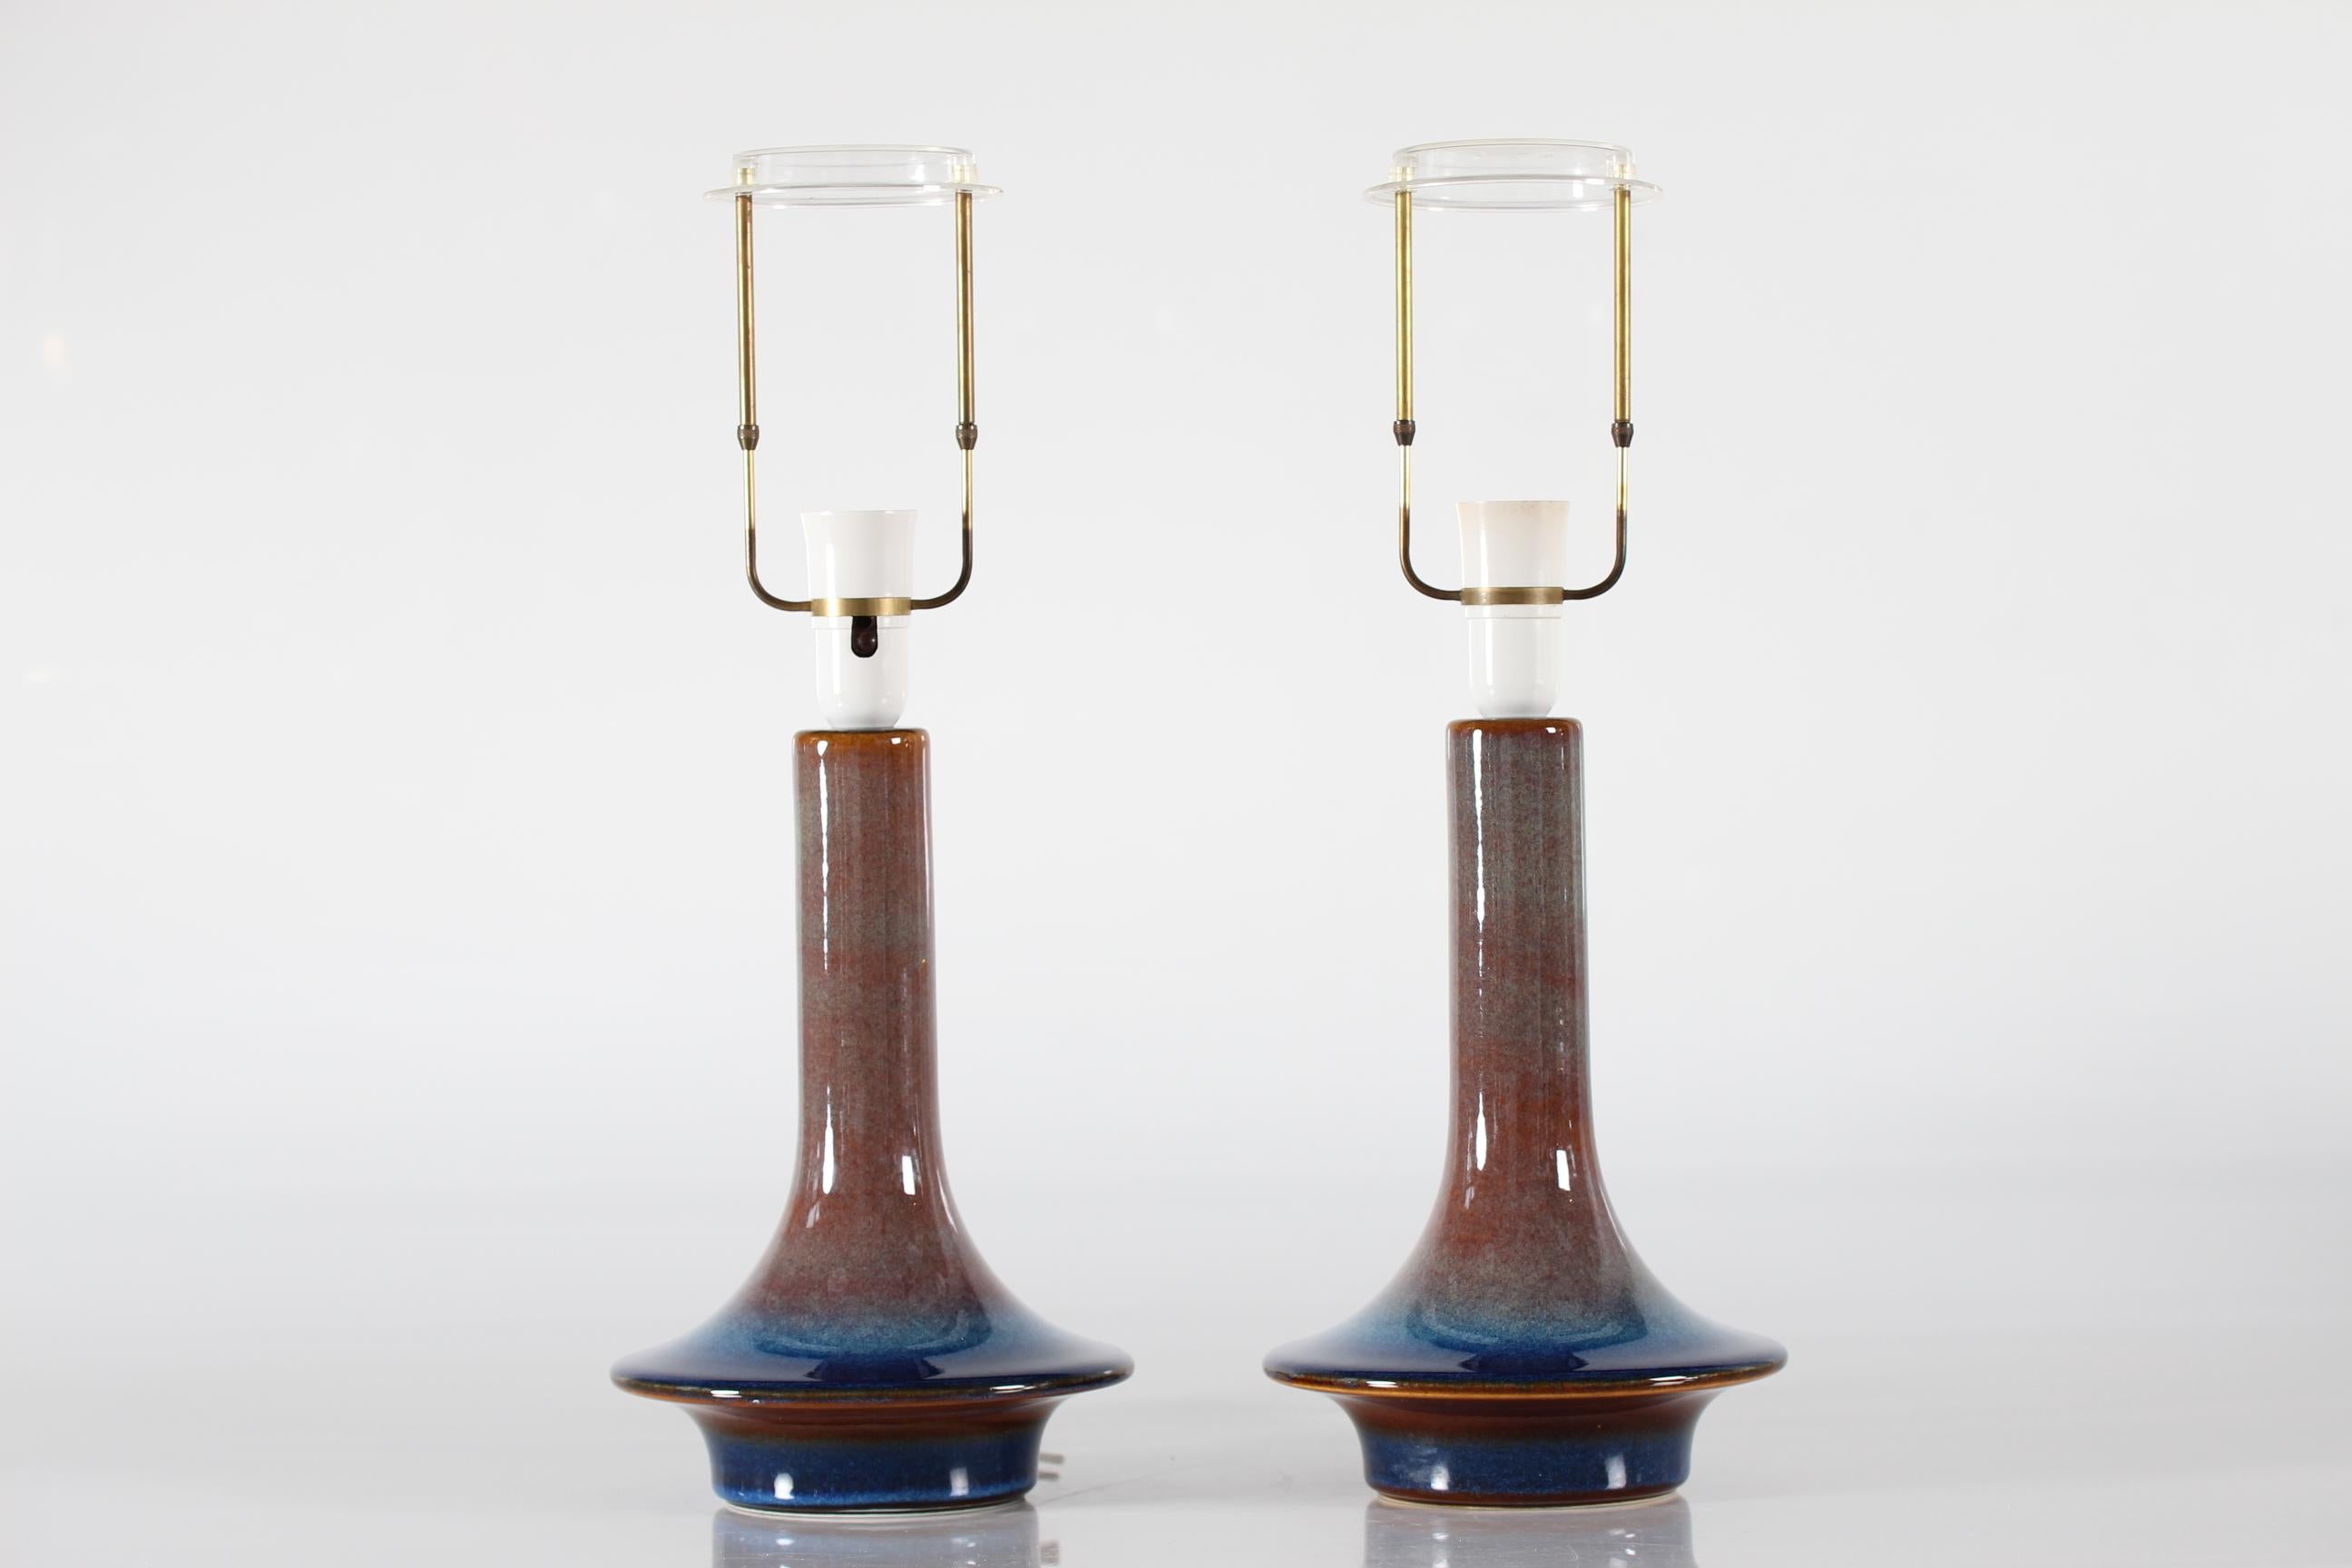 Søholm Pair of Sculptural Ufo Sharped Table Lamps Danish Modern Blue Notes 1960s For Sale 3